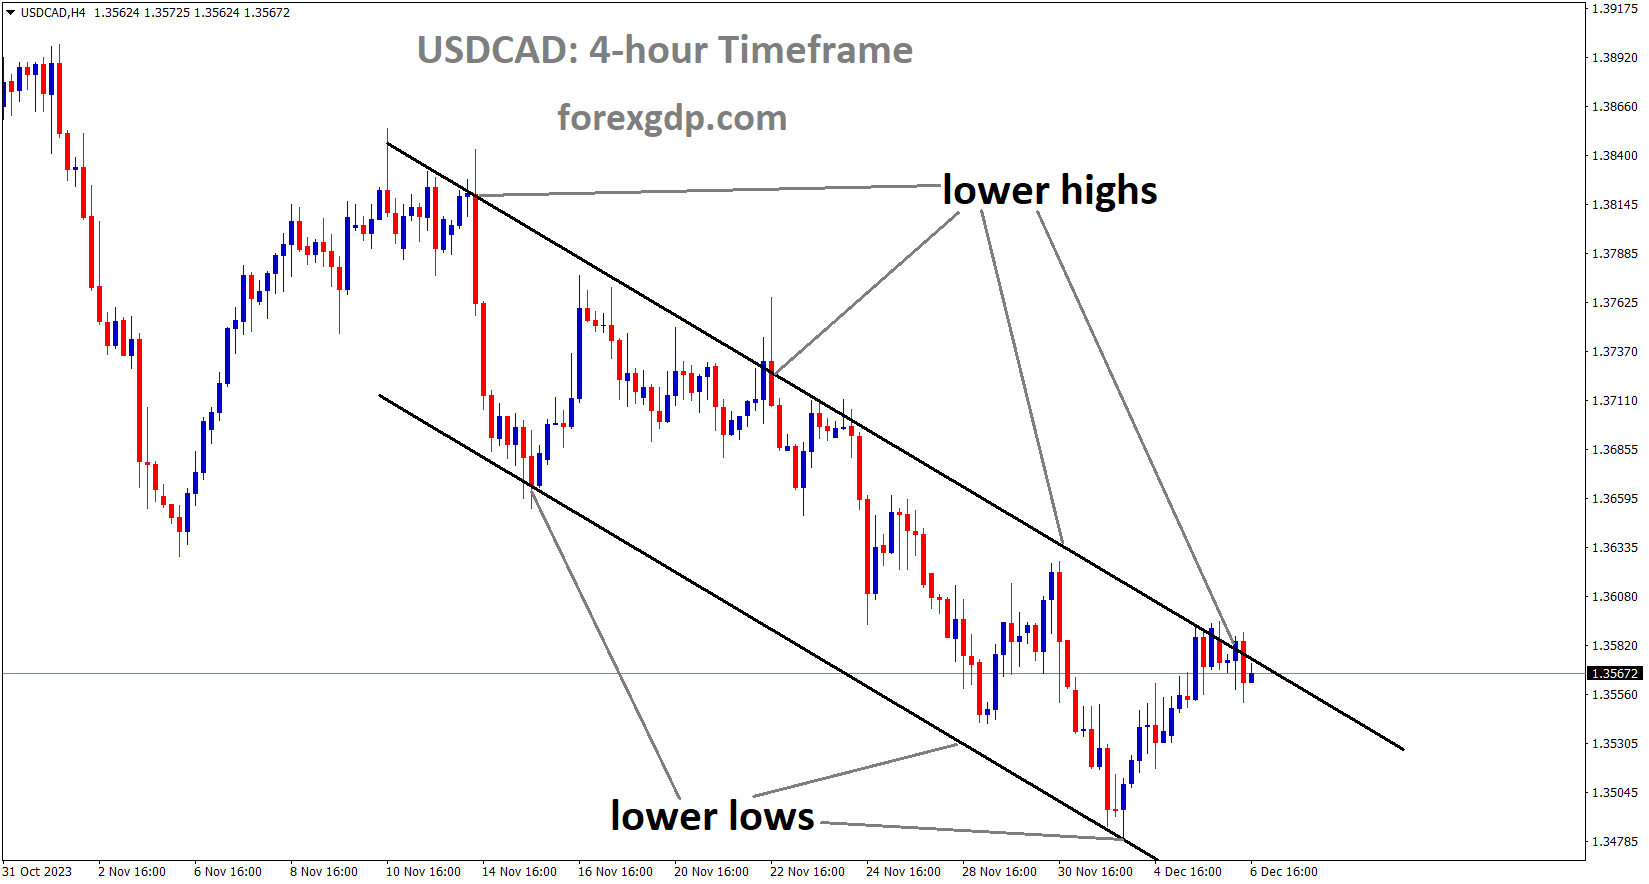 USDCAD is moving in Descending channel and market has reached lower high area of the channel